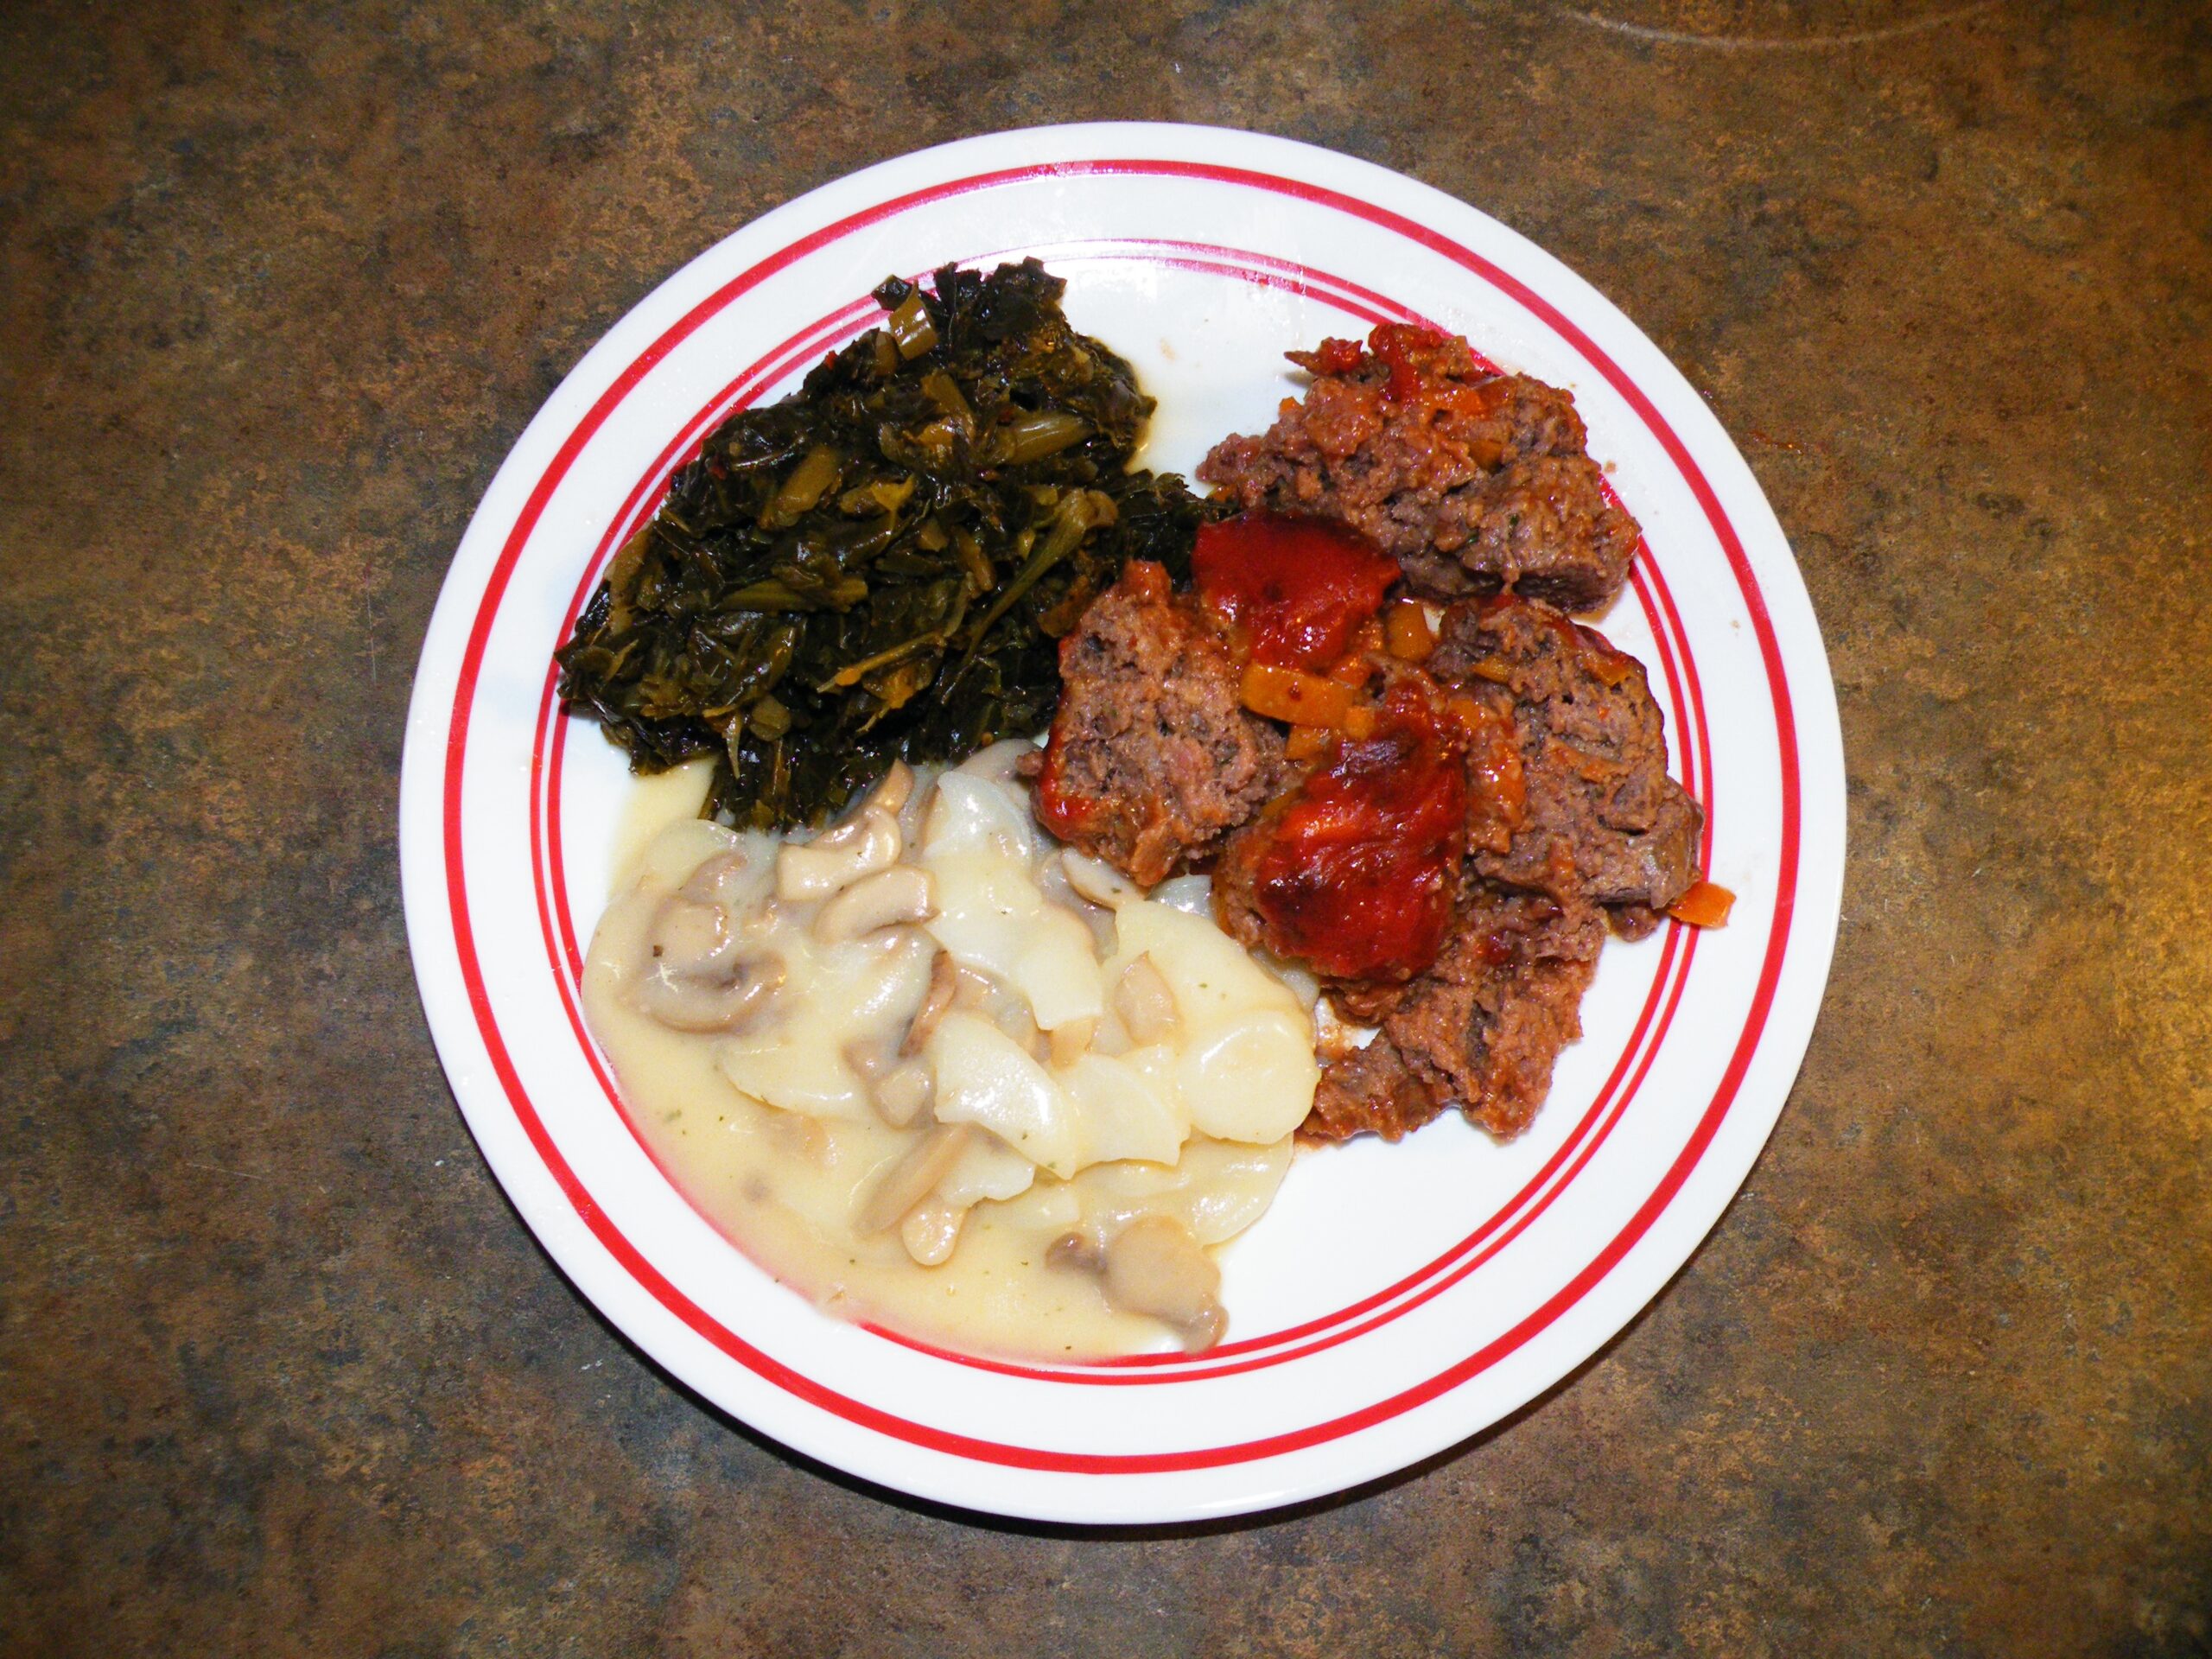 Gypsy Meatloaf with Southern Style Collard Greens and Scallop Potatoes with Mushrooms